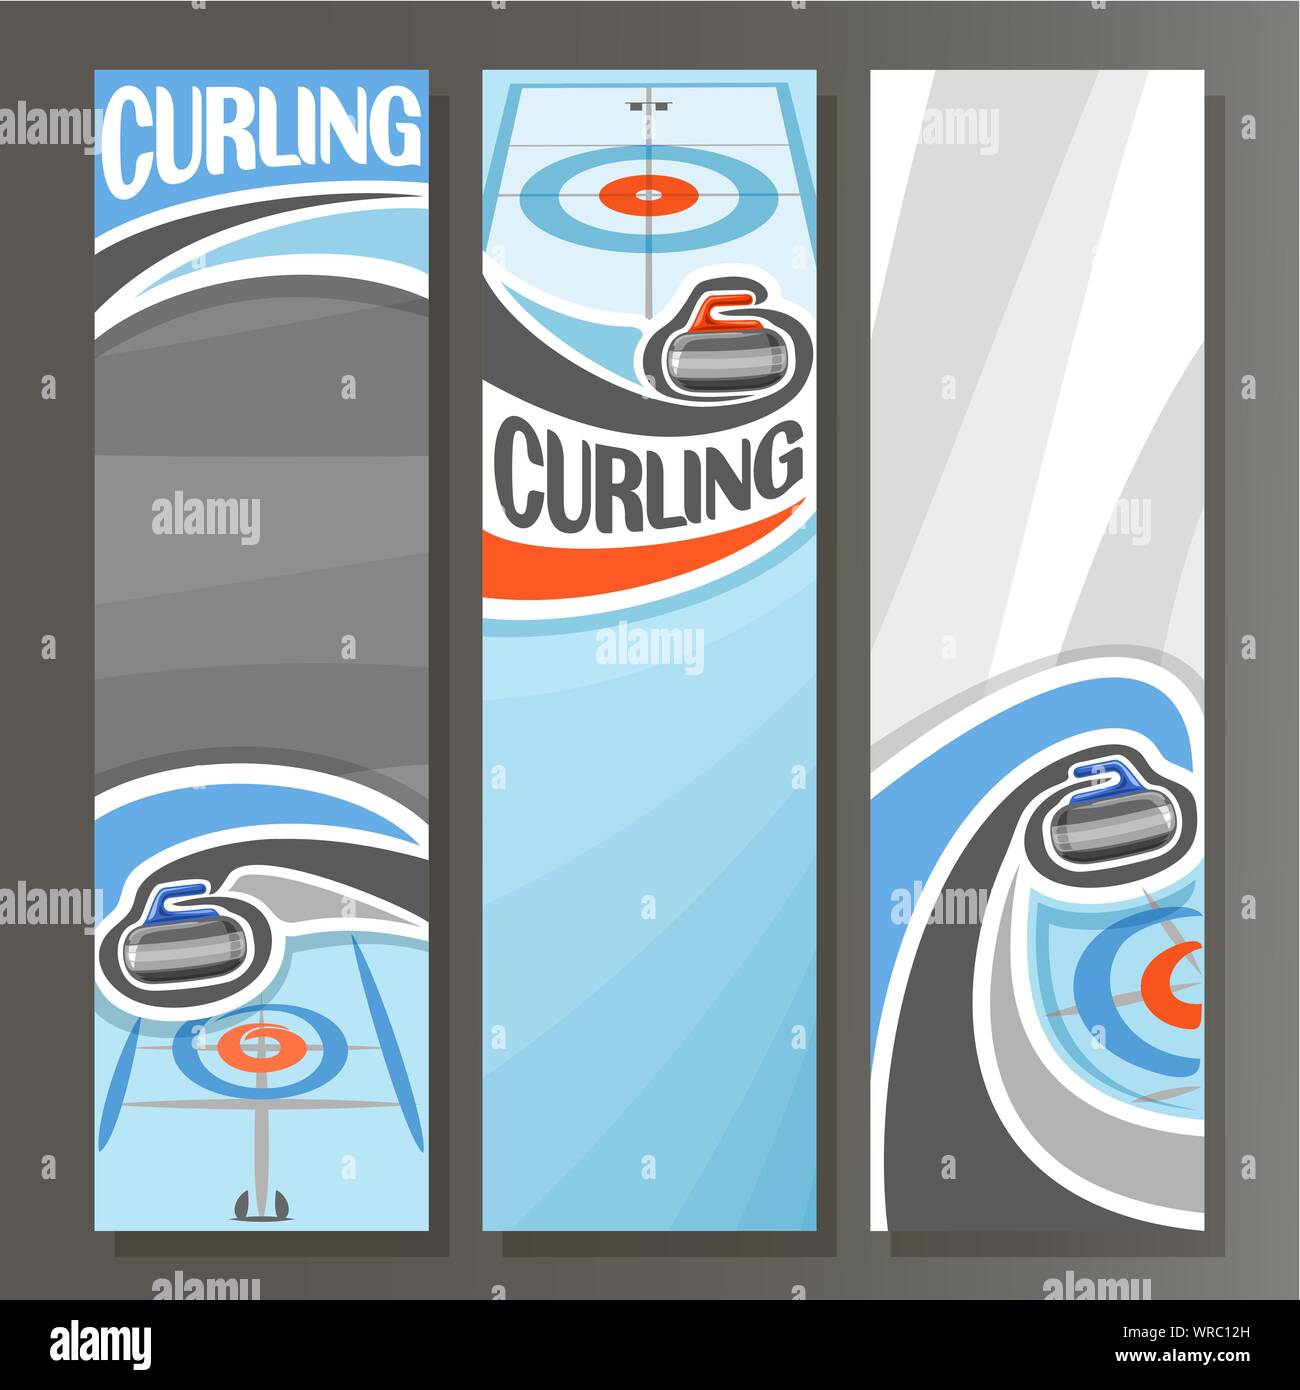 Vector vertical banners for Curling: 3 cartoon templates for text on curling theme, on ice rink granite rock sliding in target on grey background. Stock Vector